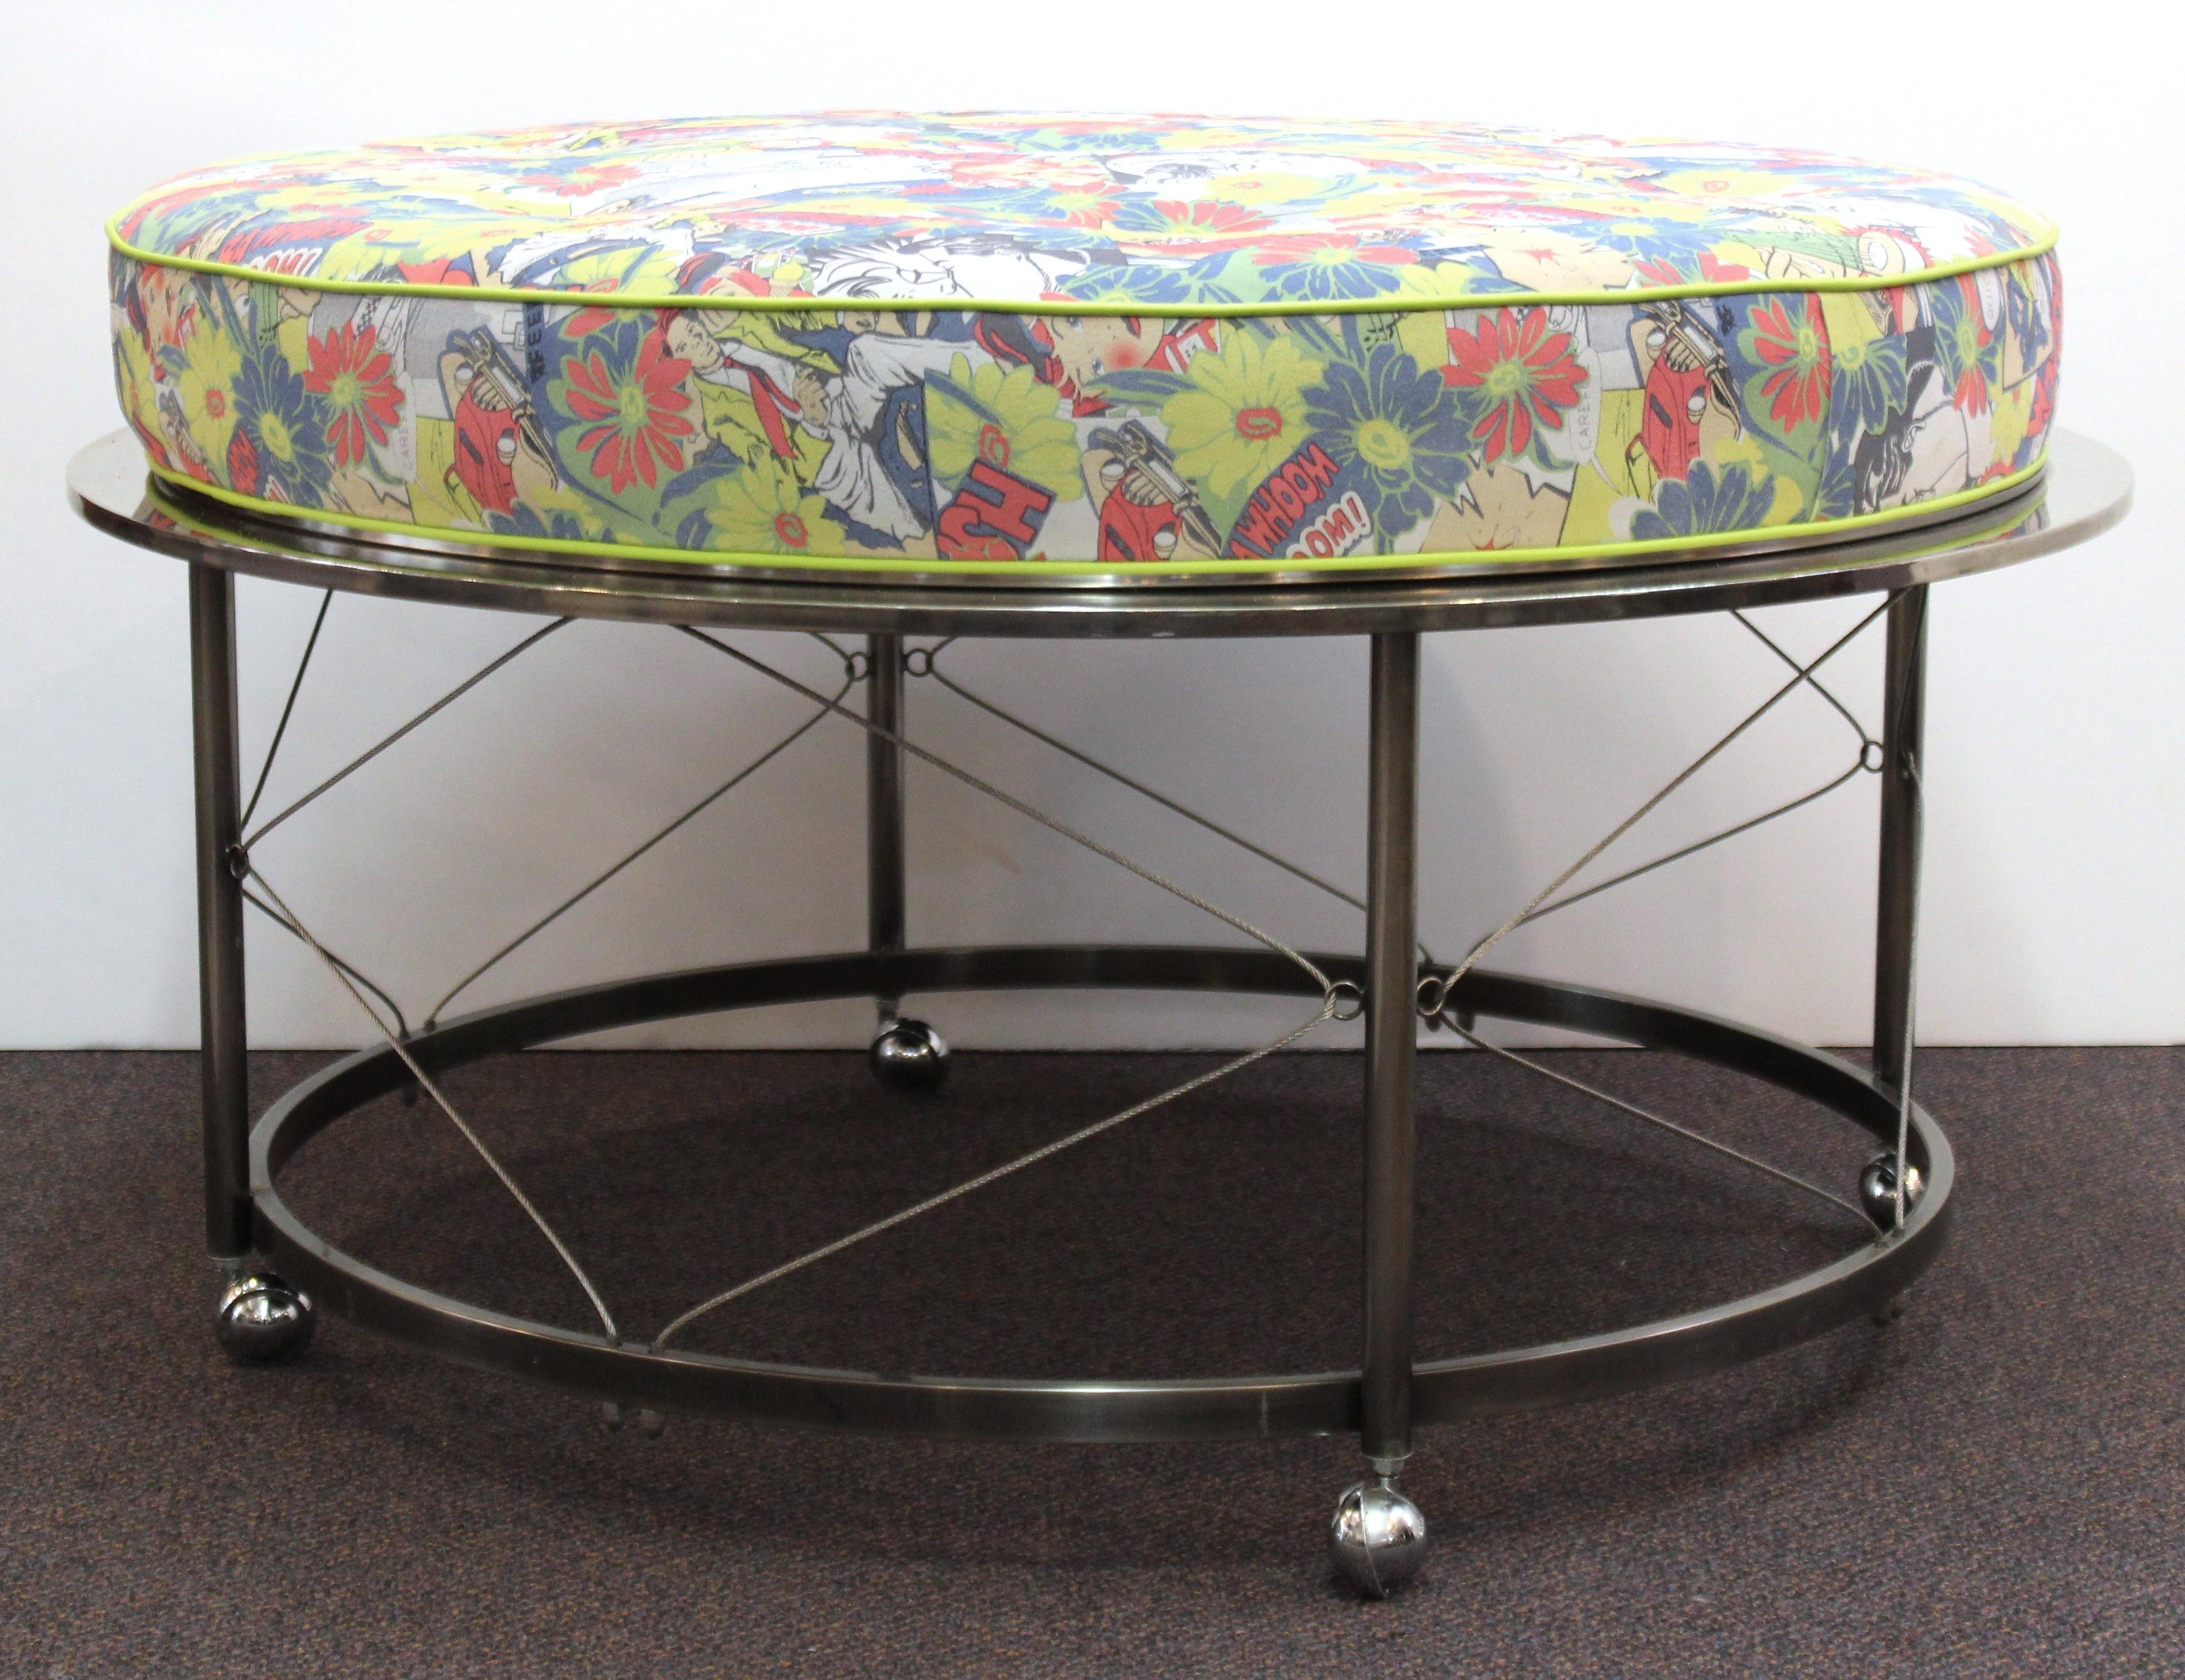 Midcentury ottoman with chrome frame on castors and new upholstery. Features include a circular frame with wire trestles and colorful comic book inspired upholstery. Wear appropriate to age and use. The ottoman remains in very good condition.